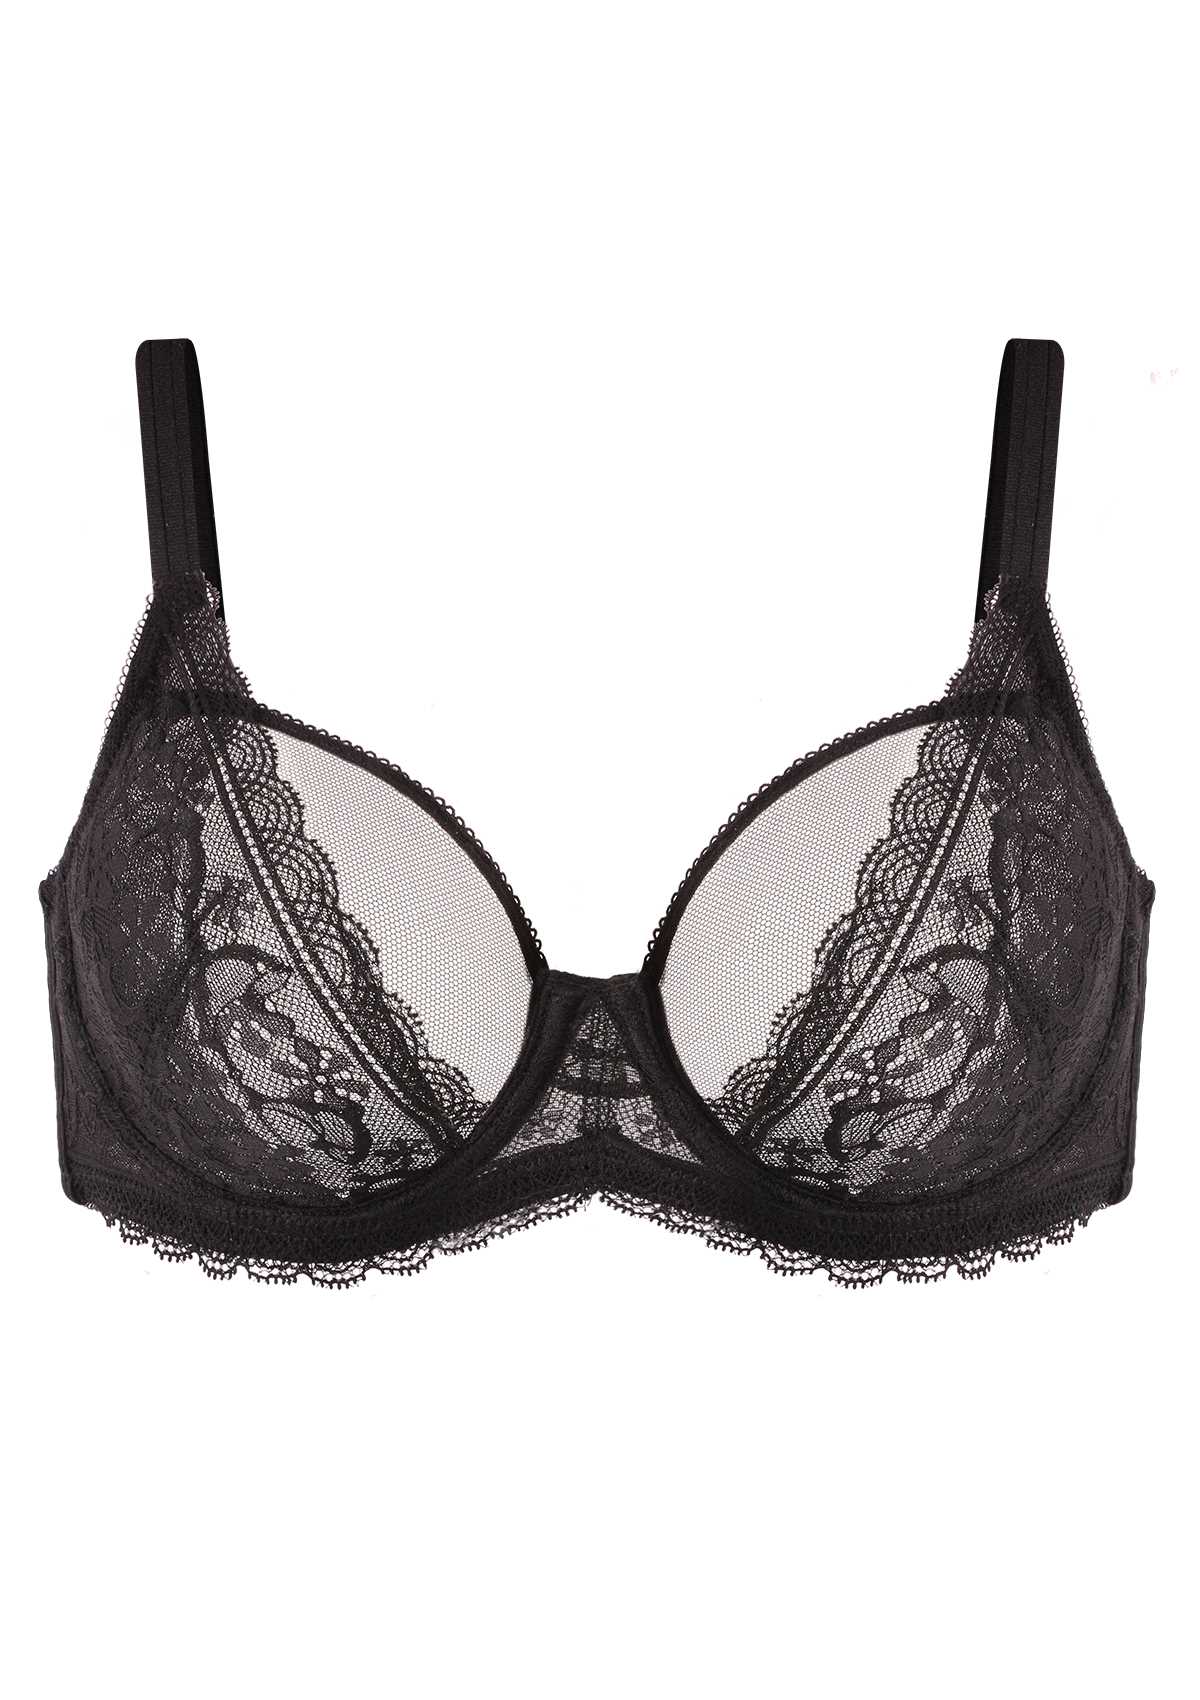 HSIA Anemone Lace Bra And Panties: Back Support Wired Bra - Black / 40 / DD/E